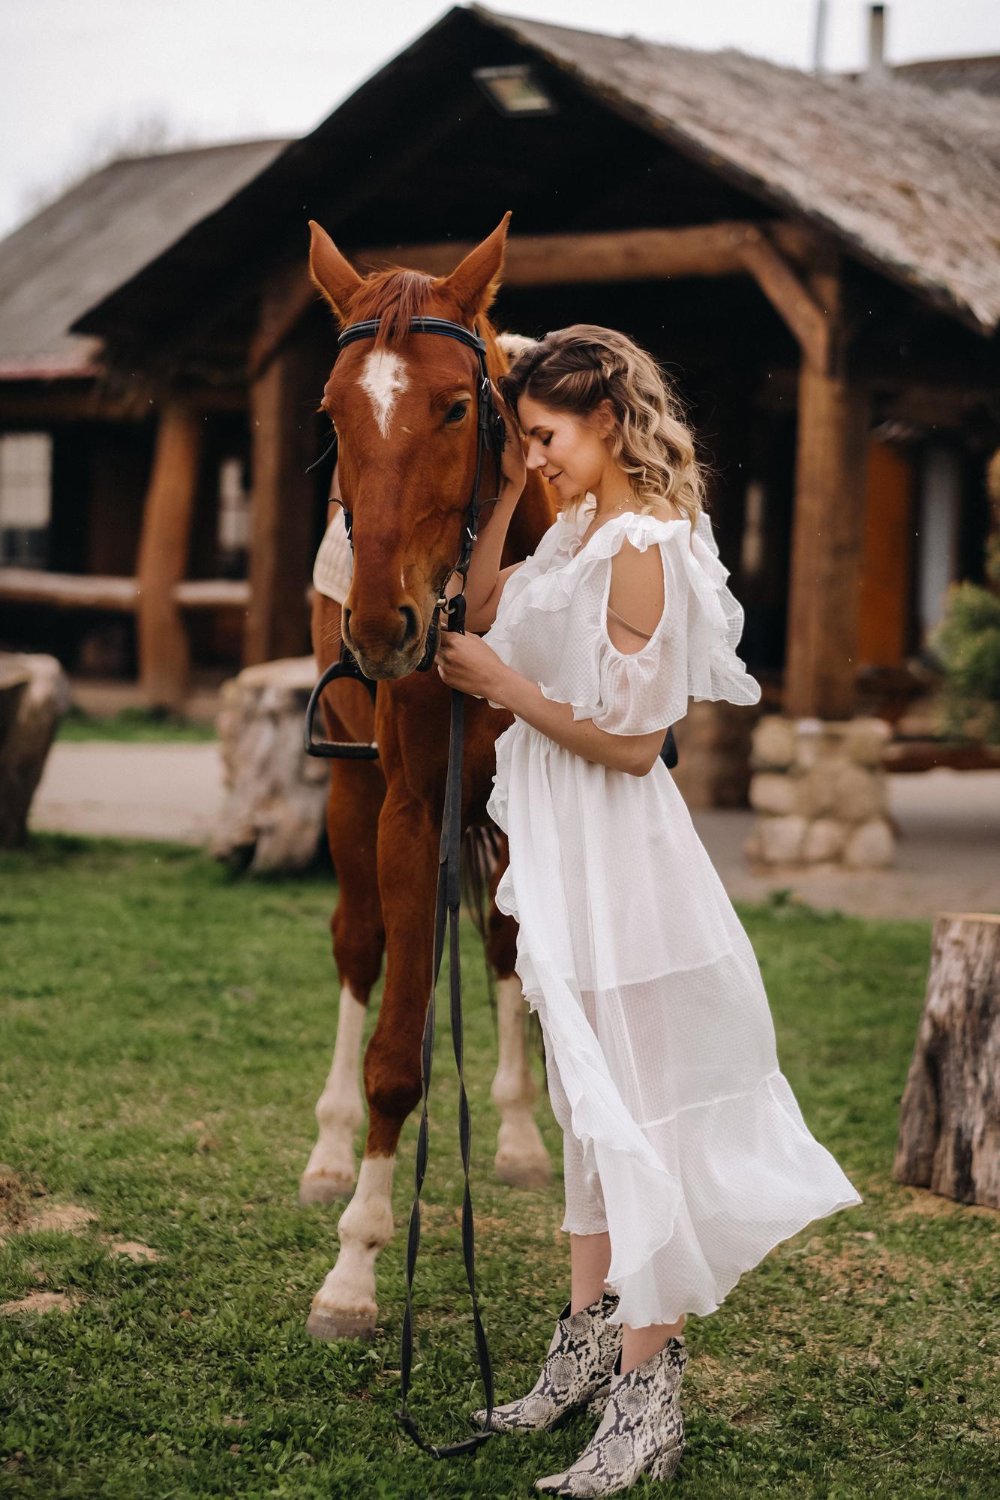 eautiful girl in a white sundress next to a horse on an old ranch